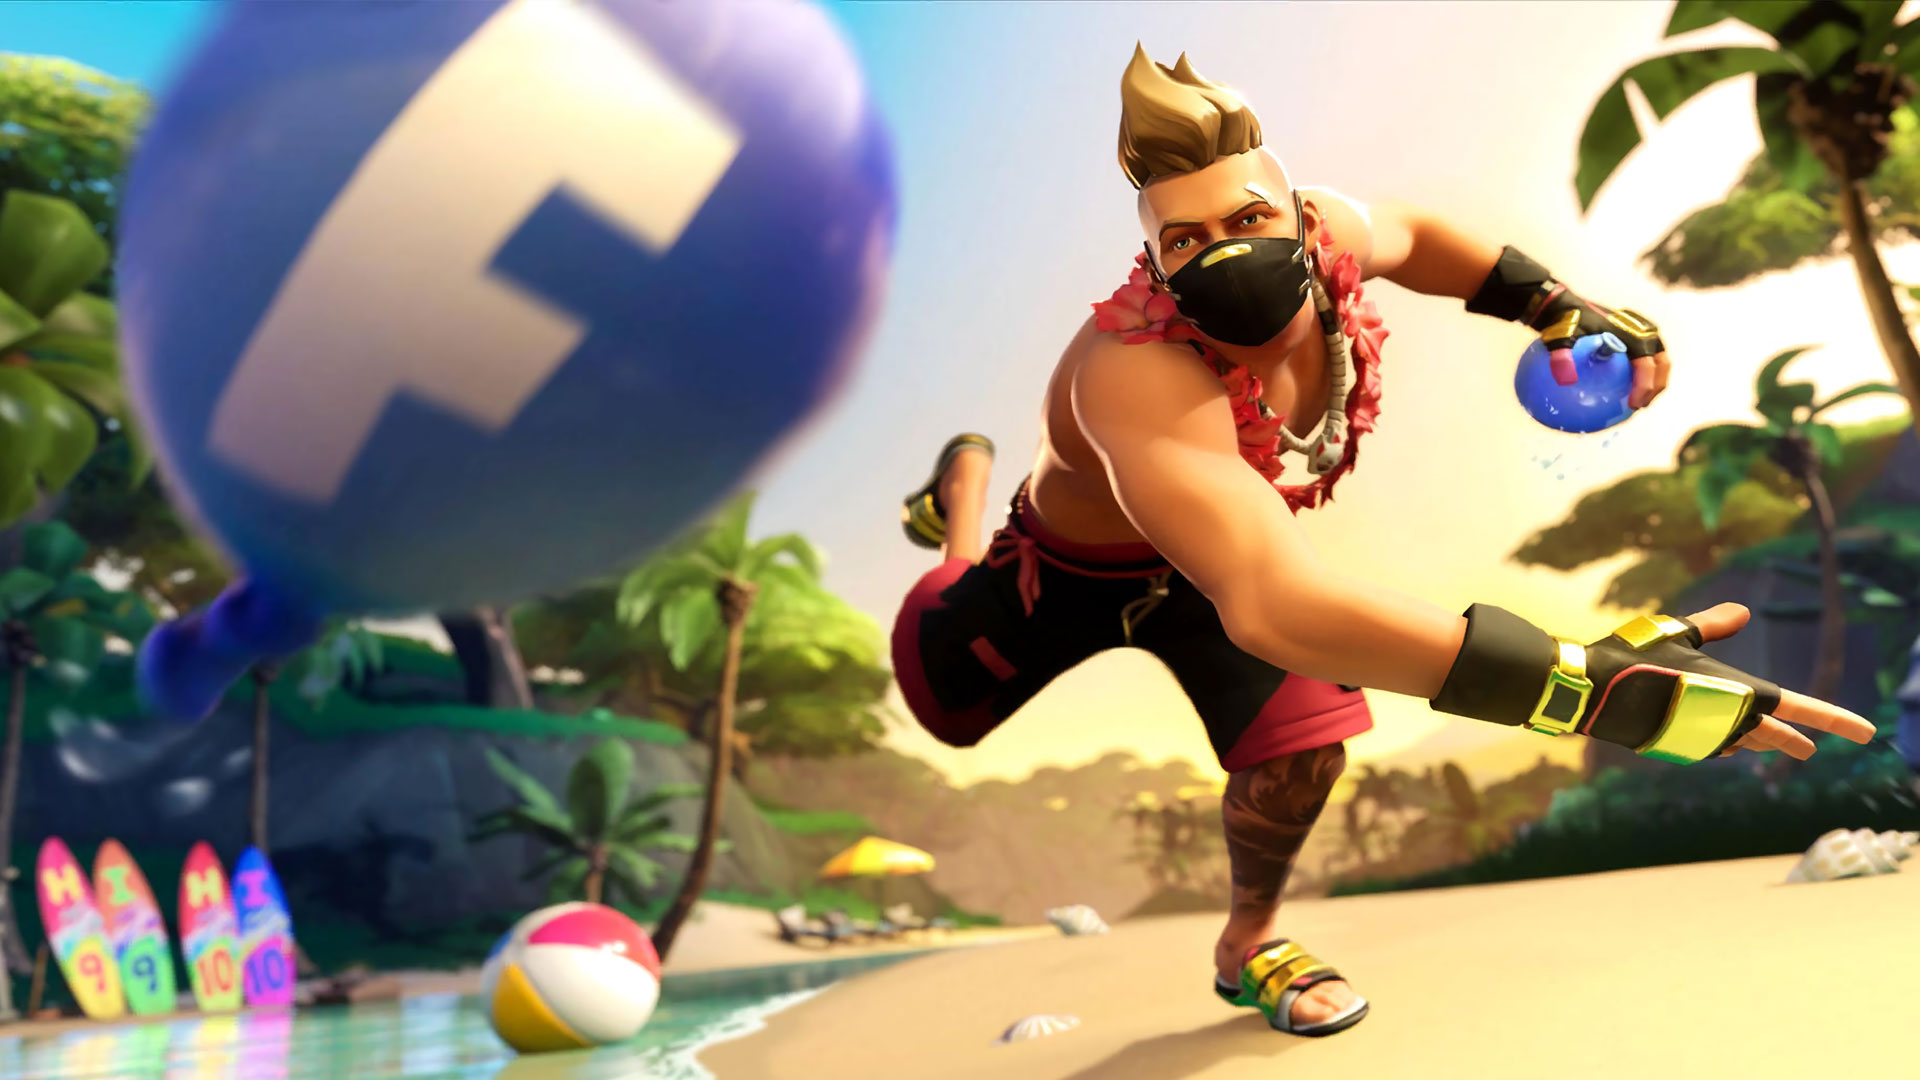 Free download Fortnite Summer Drift Skin Outfit PNGs Image Pro Game Guides [1920x1080] for your Desktop, Mobile & Tablet. Explore Summer Drift Fortnite Wallpaper. Summer Drift Fortnite Wallpaper, Drift